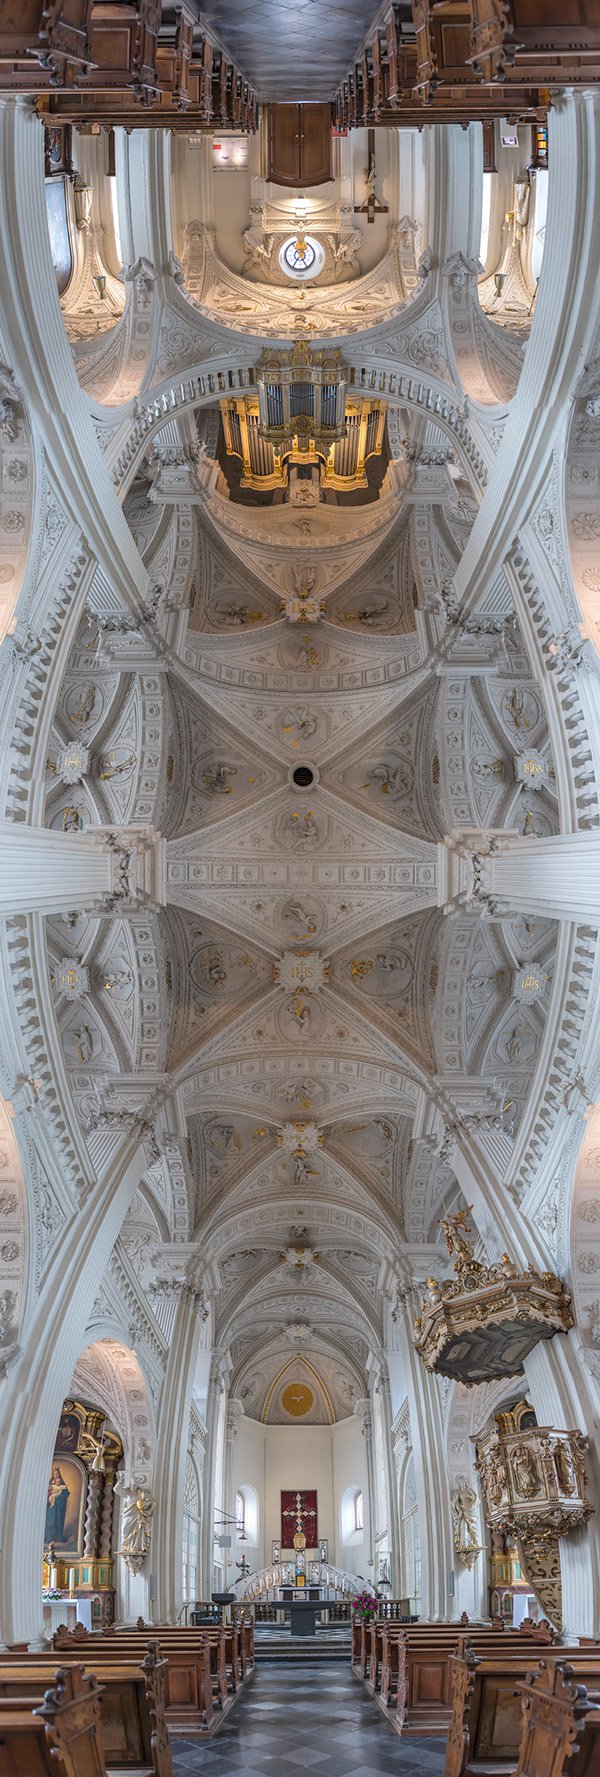 Vertical Churches An Ethereal Architecture Photography Series By Richard Silver 11